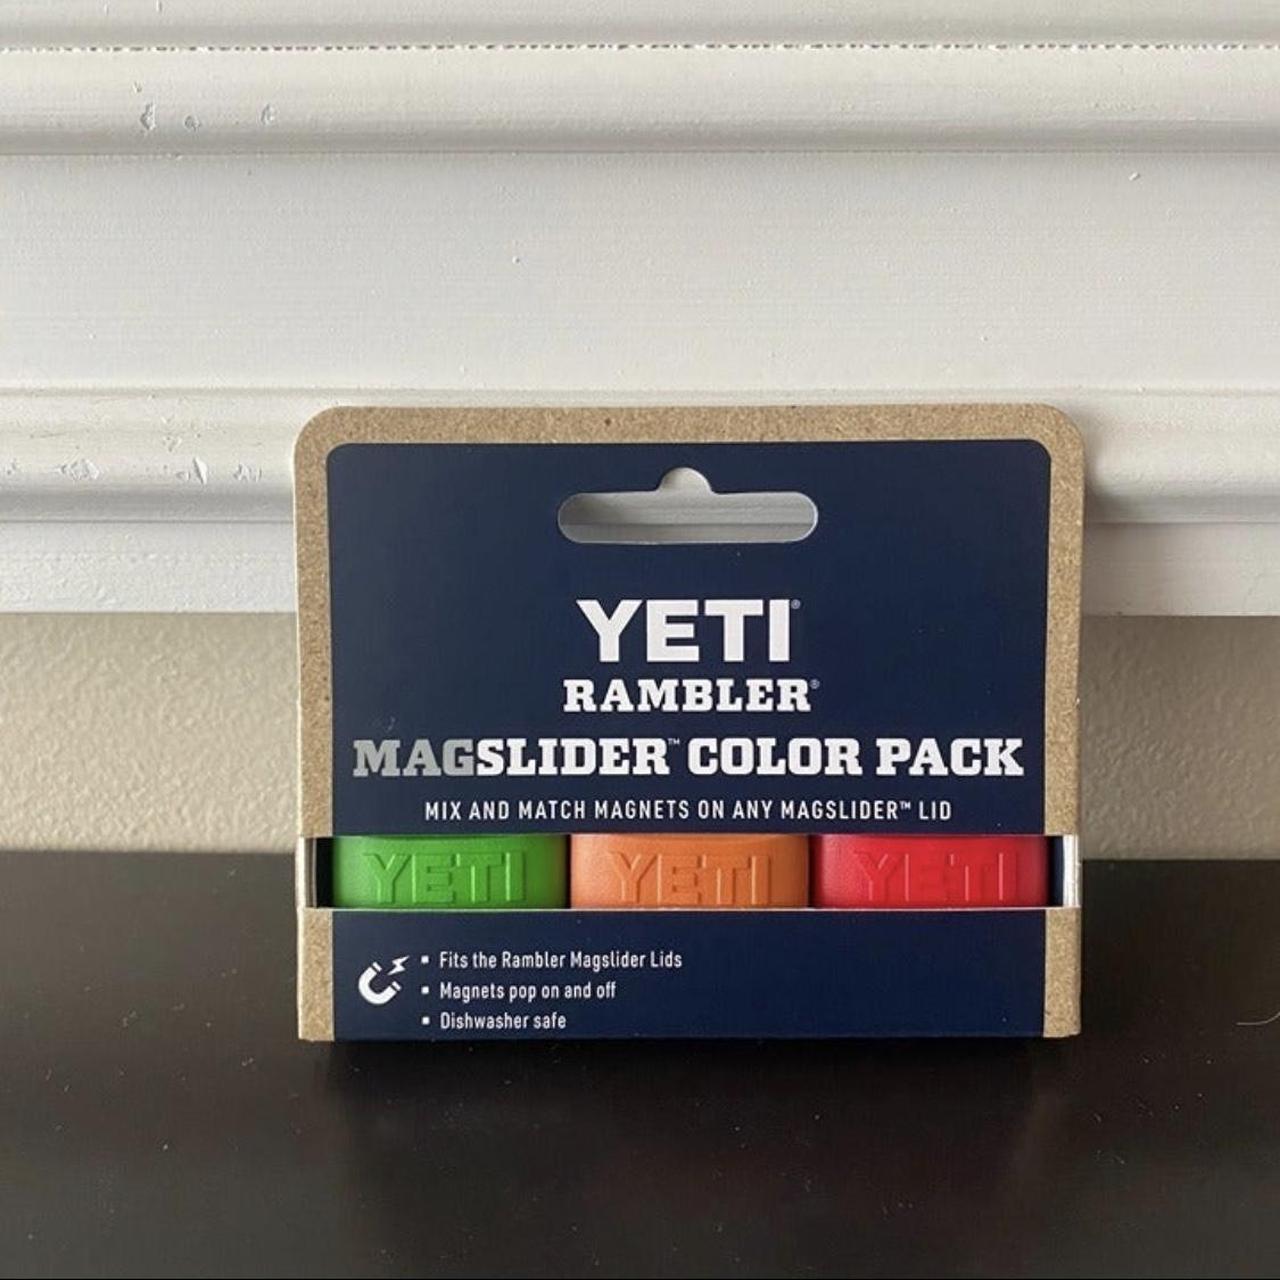 YETI Magslider 3 Pack, Canopy Green, High Desert Clay, Rescue Red